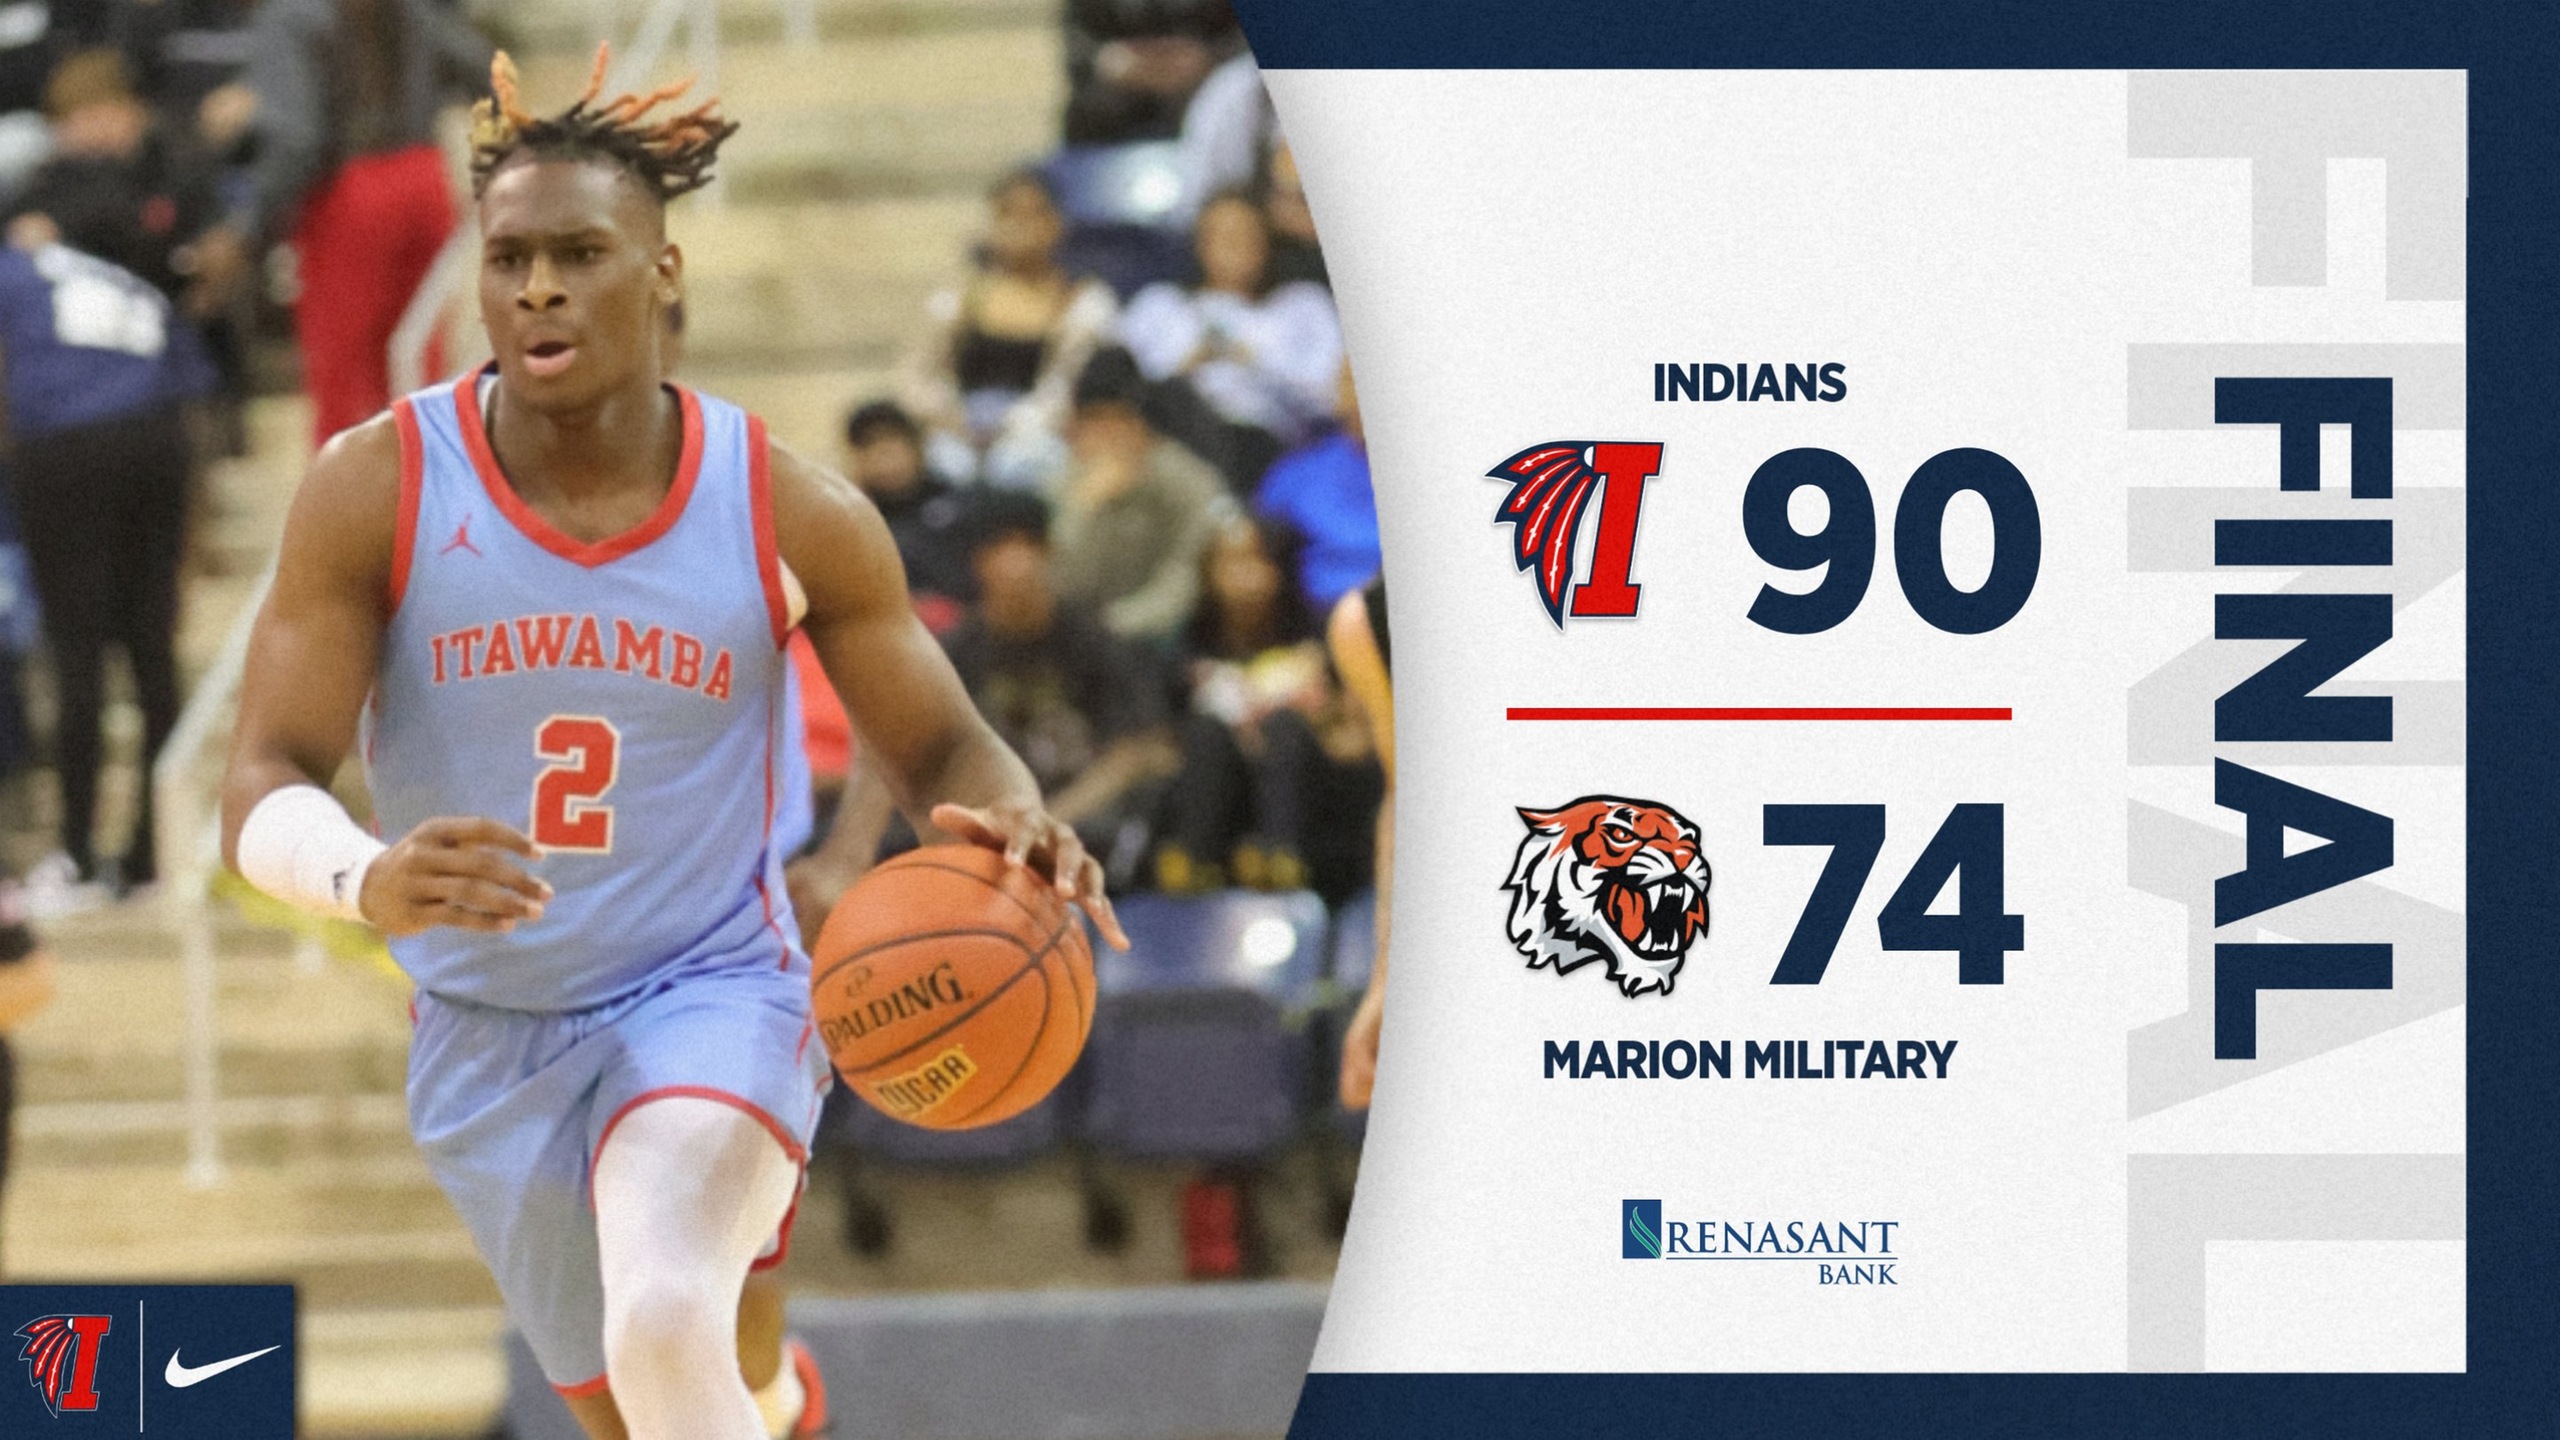 Indians take care of Marion Military, 90-74